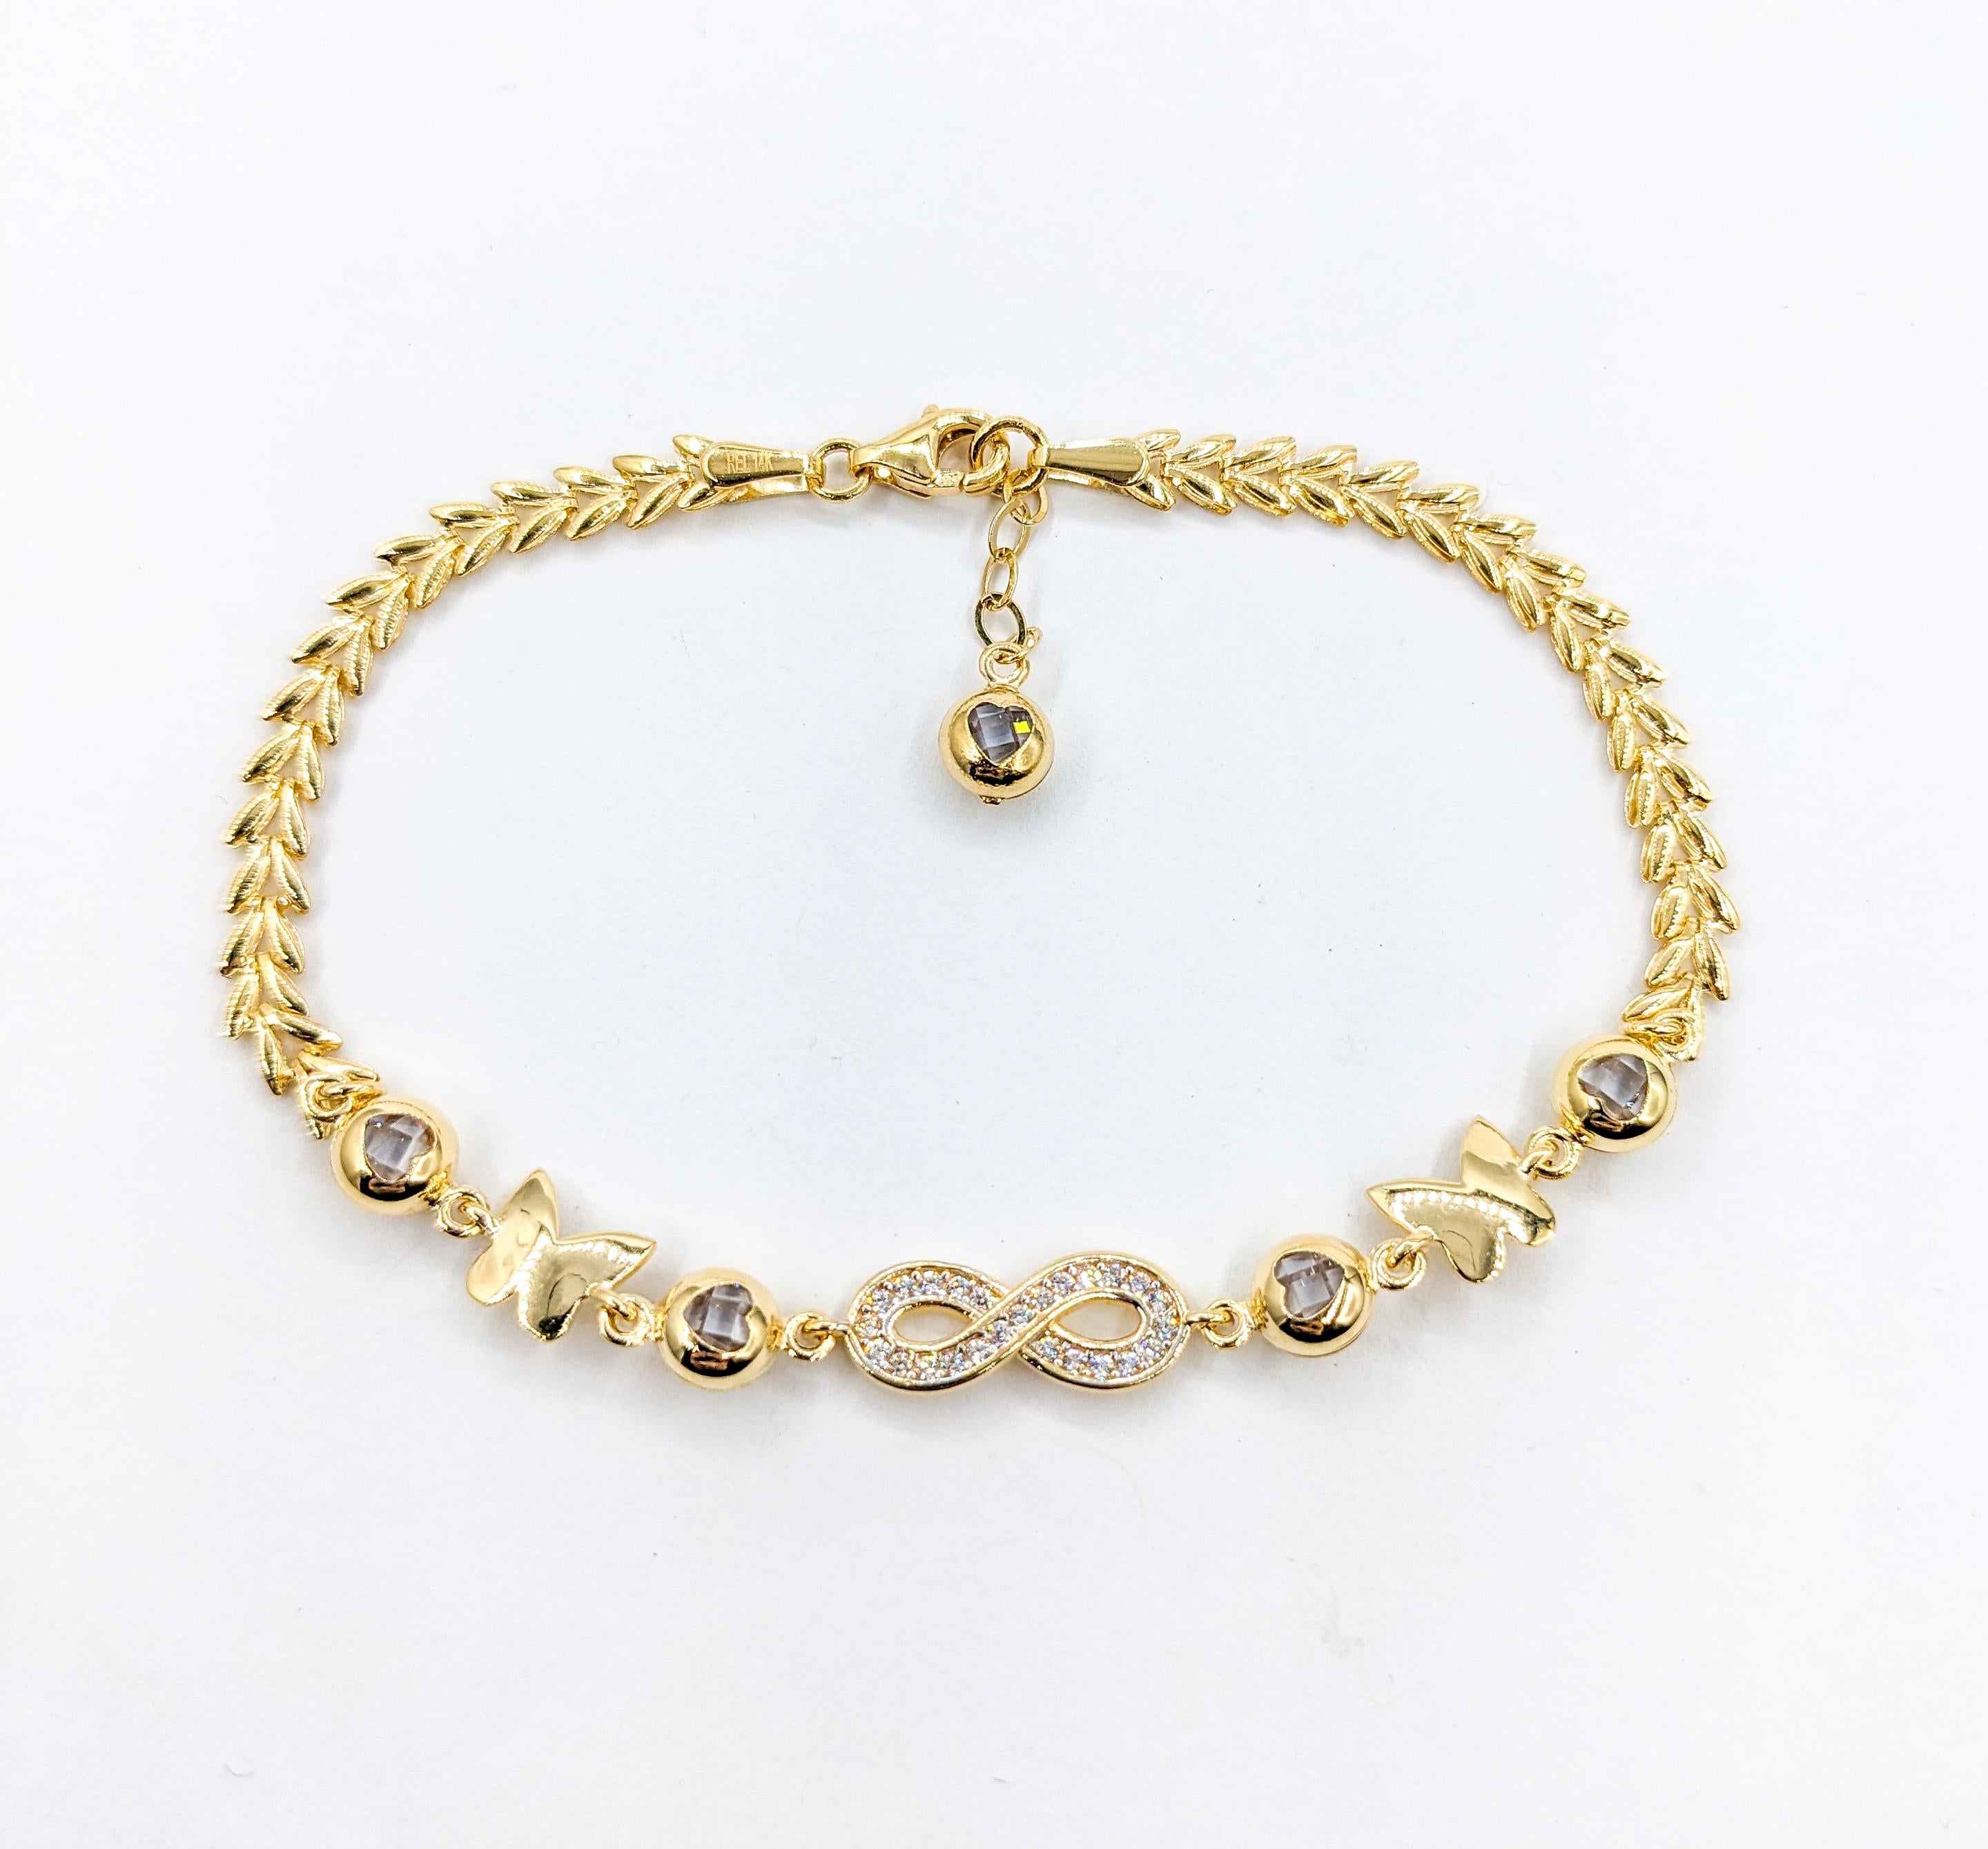 Infinity, Hearts & Butterflies CZ Stone Bracelet In Yellow Gold

Indulge in the allure of this exquisite 14kt Yellow Gold Bracelet featuring dazzling Synthetic Stones with impeccable clarity and a radiant white sparkle. This piece also includes